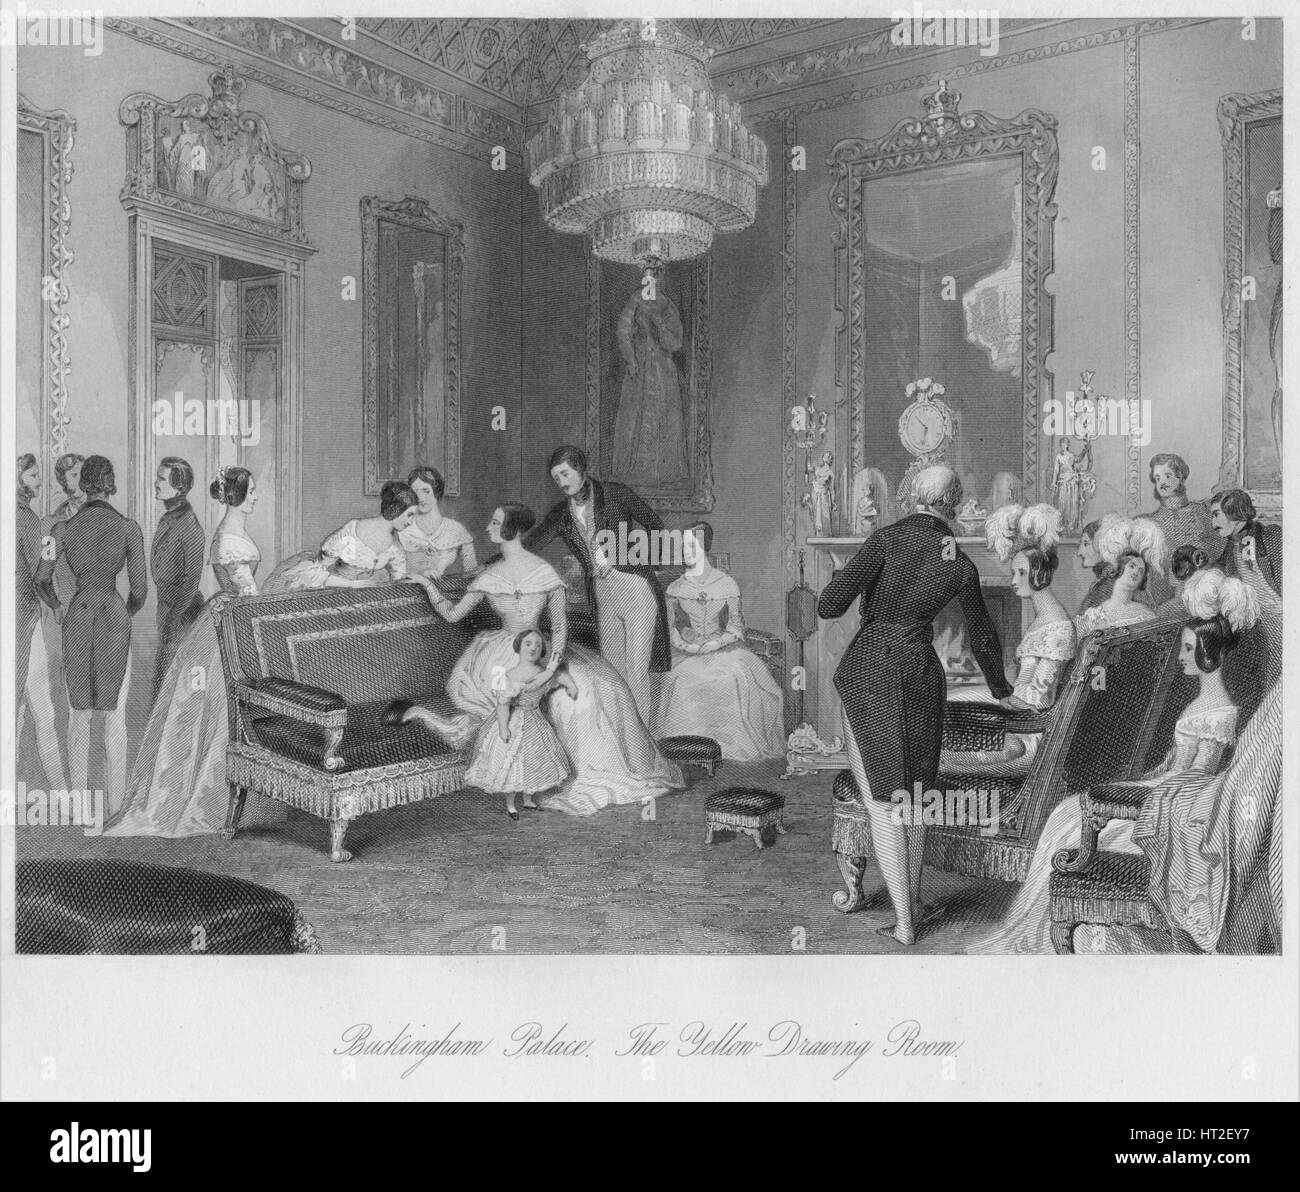 "Buckingham Palace. Il Giallo Drawing Room', C1841. Artista: Henry Melville. Foto Stock